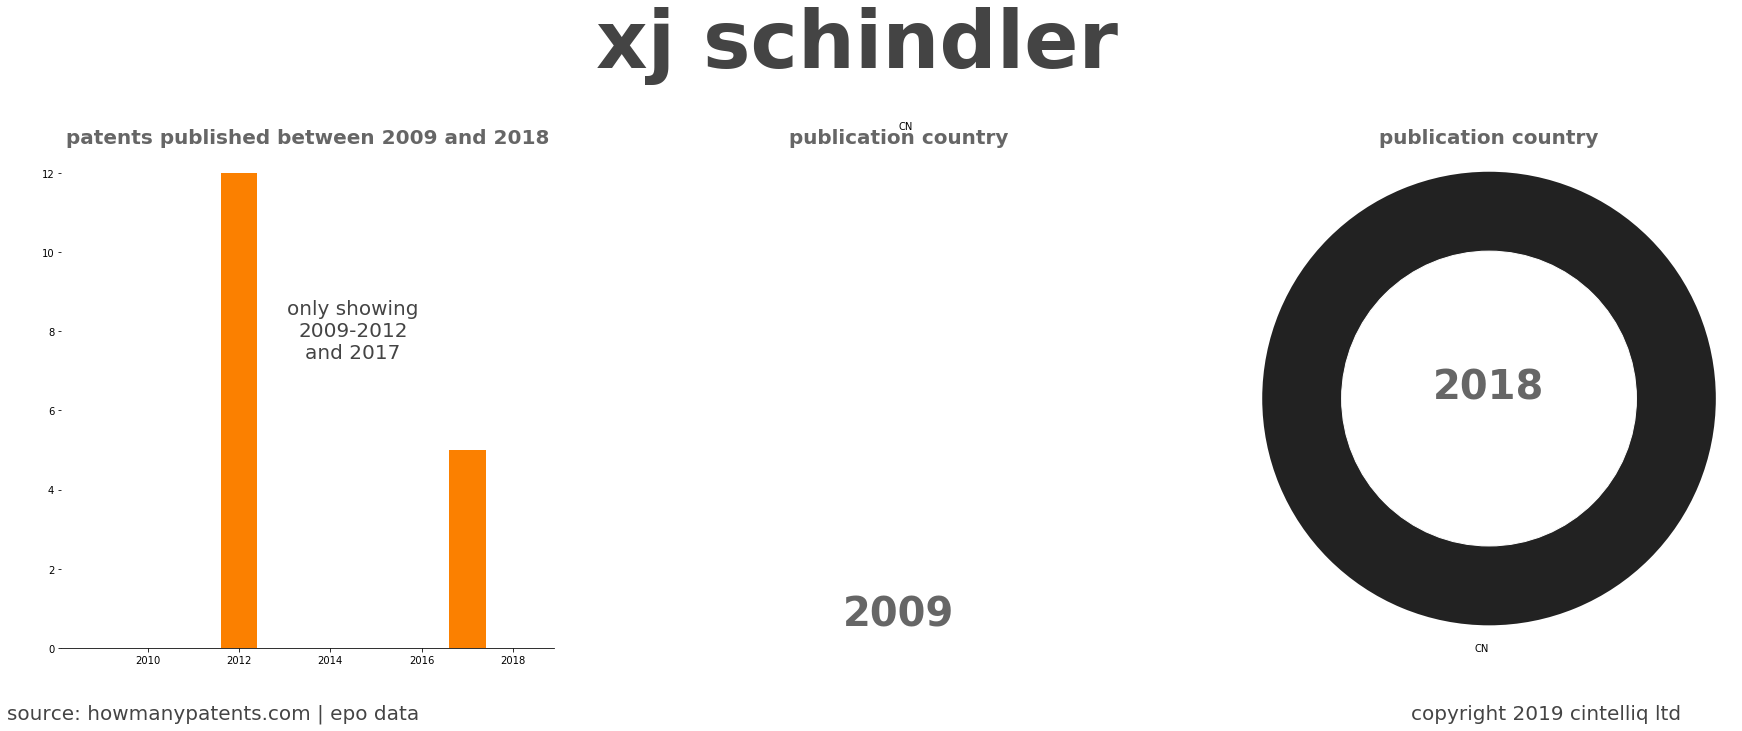 summary of patents for Xj Schindler 